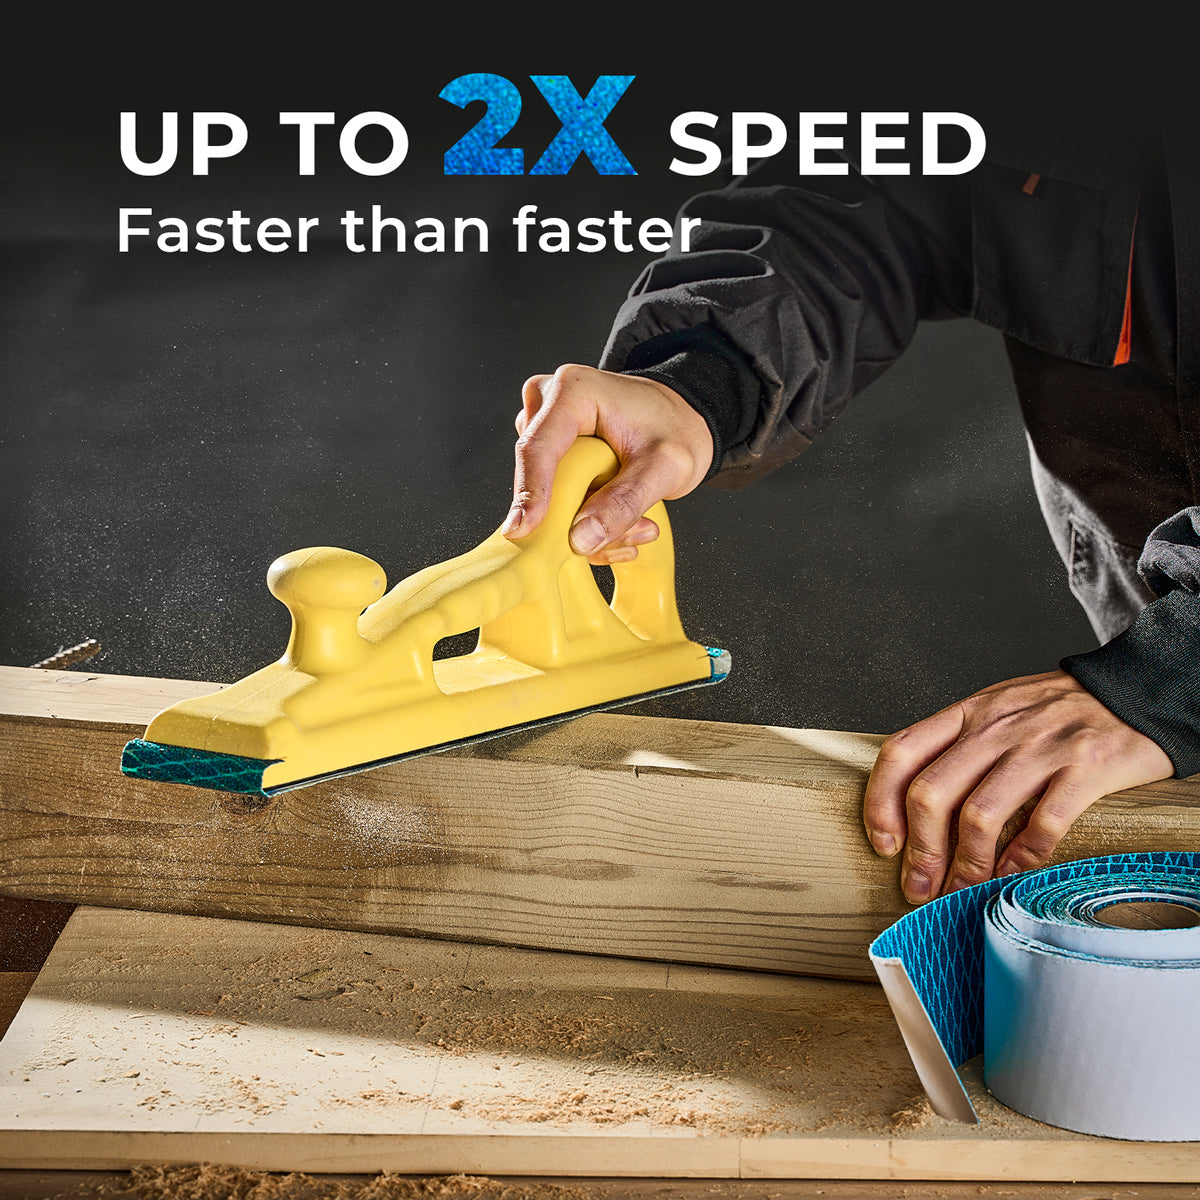 UP TO 2X FASTER SPEED